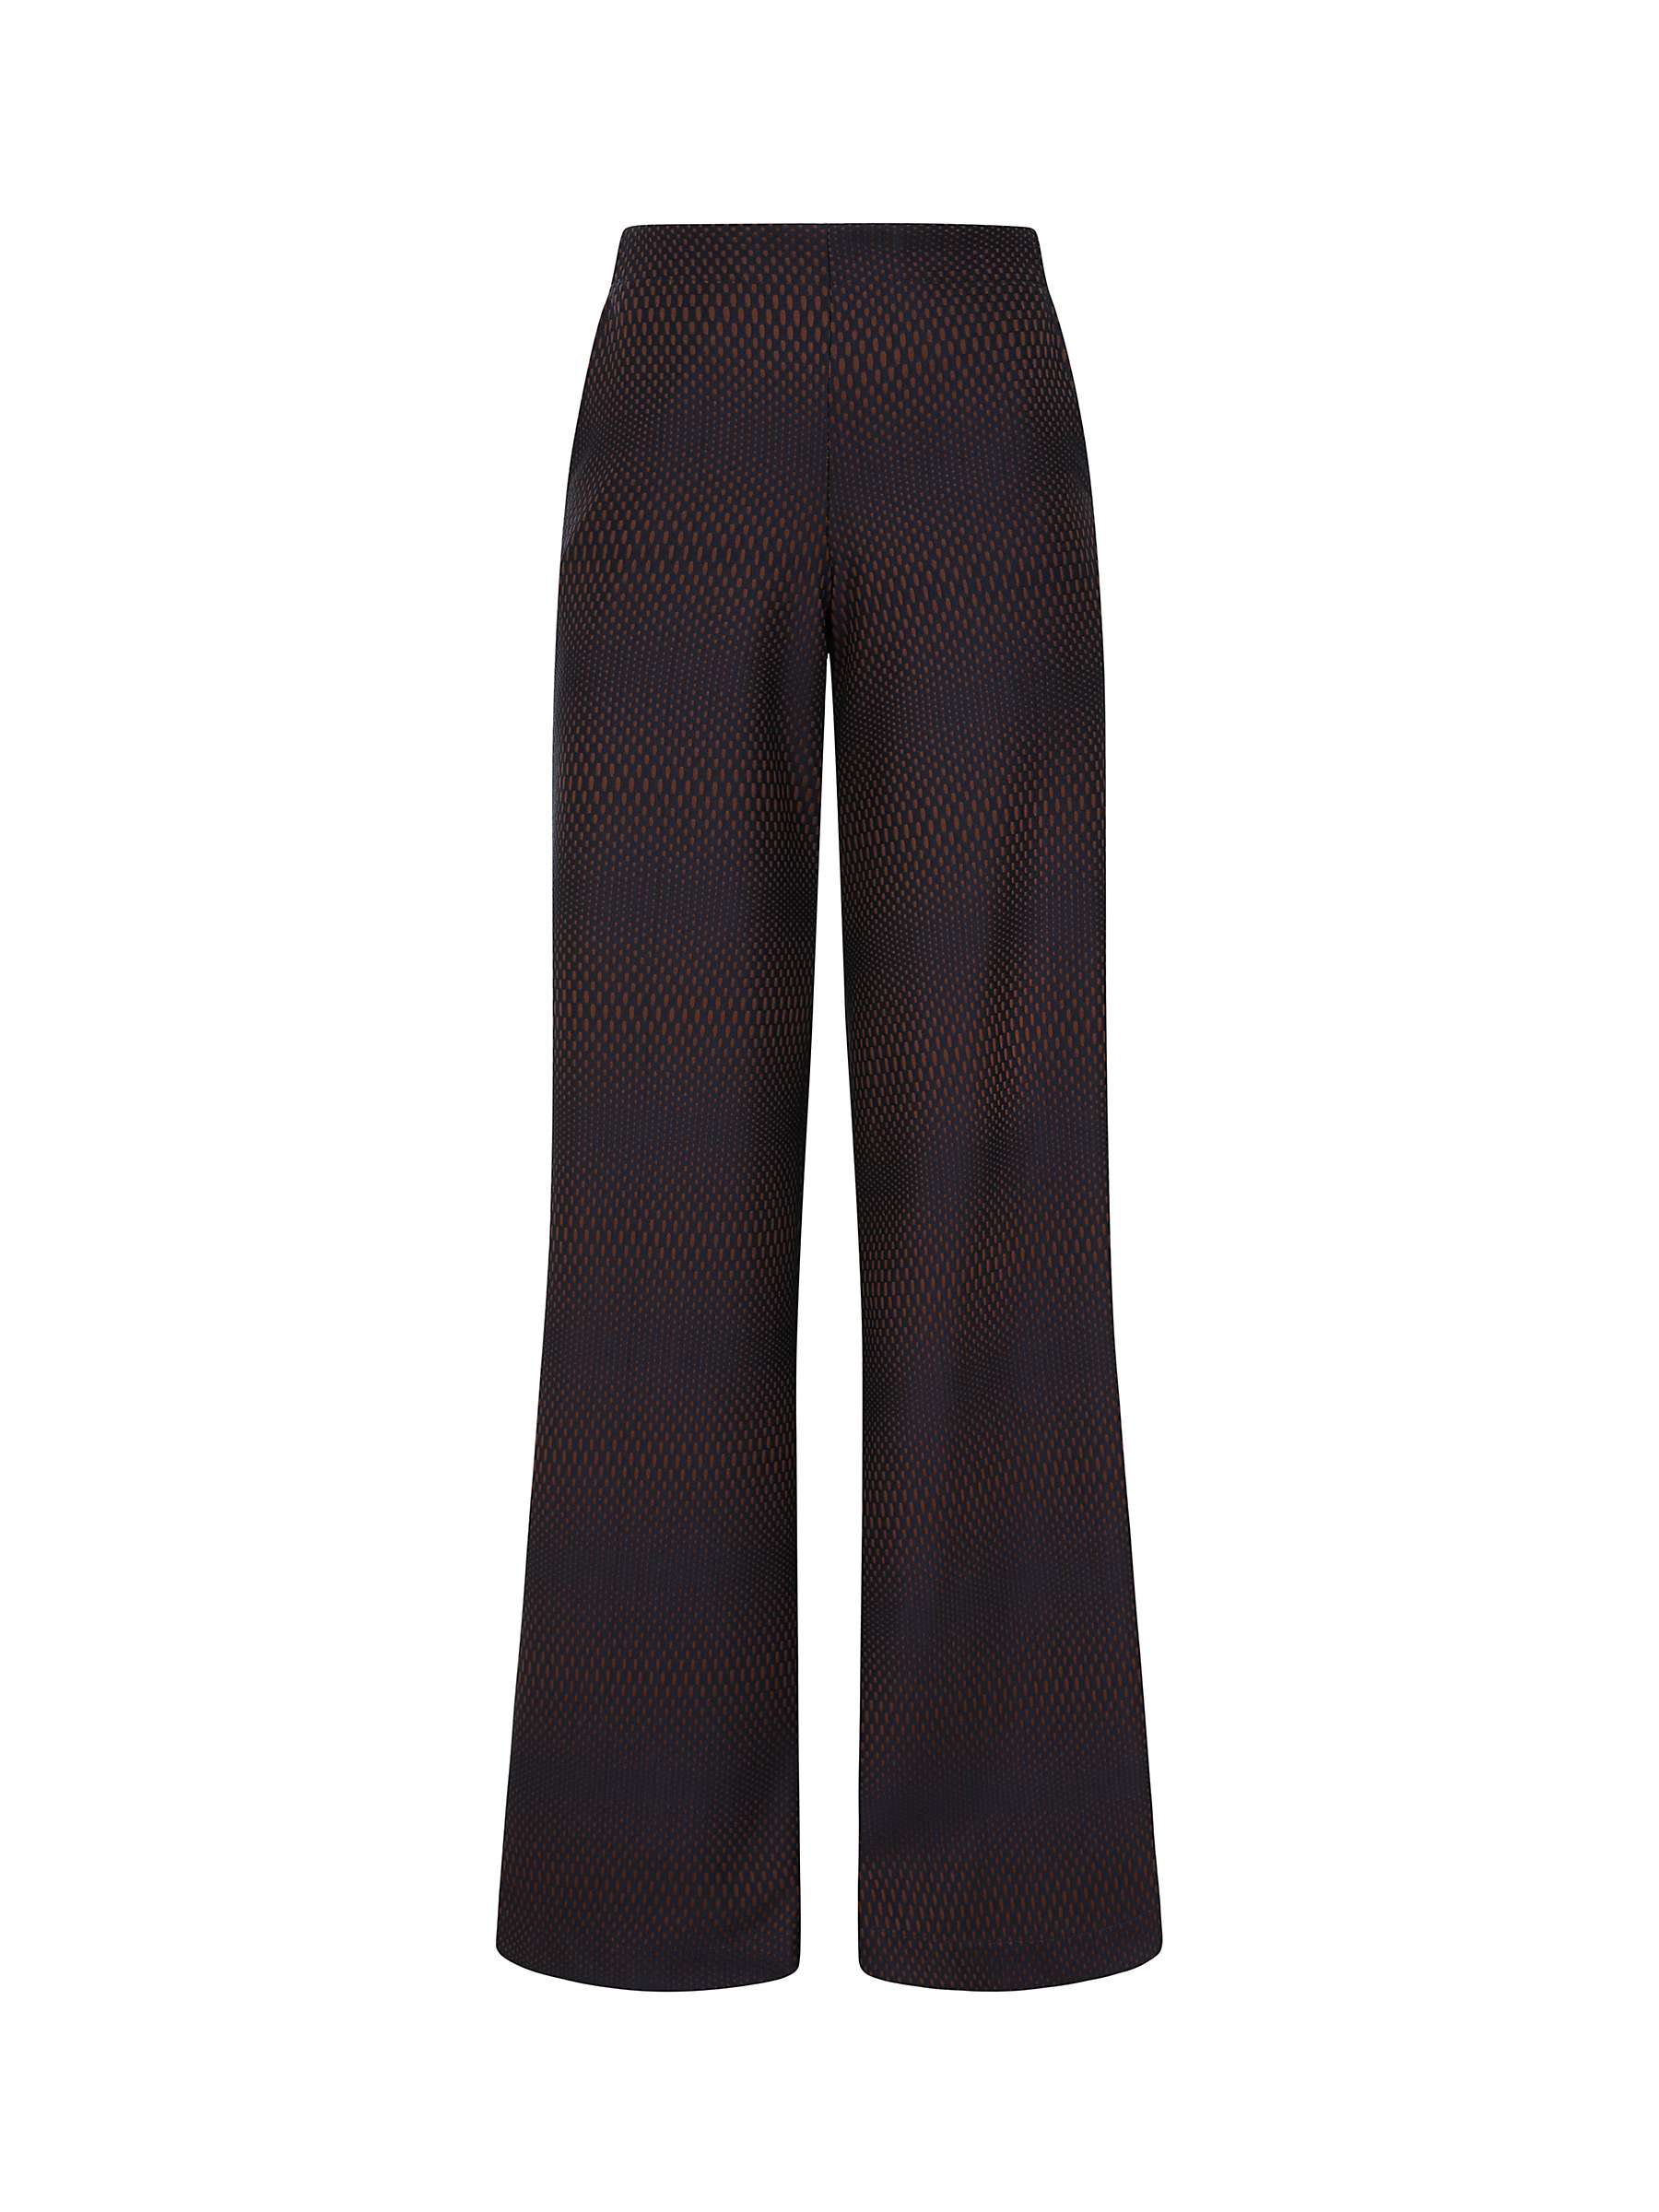 Buy HotSquash Textured Wide Leg Trousers, Brown/Navy Online at johnlewis.com